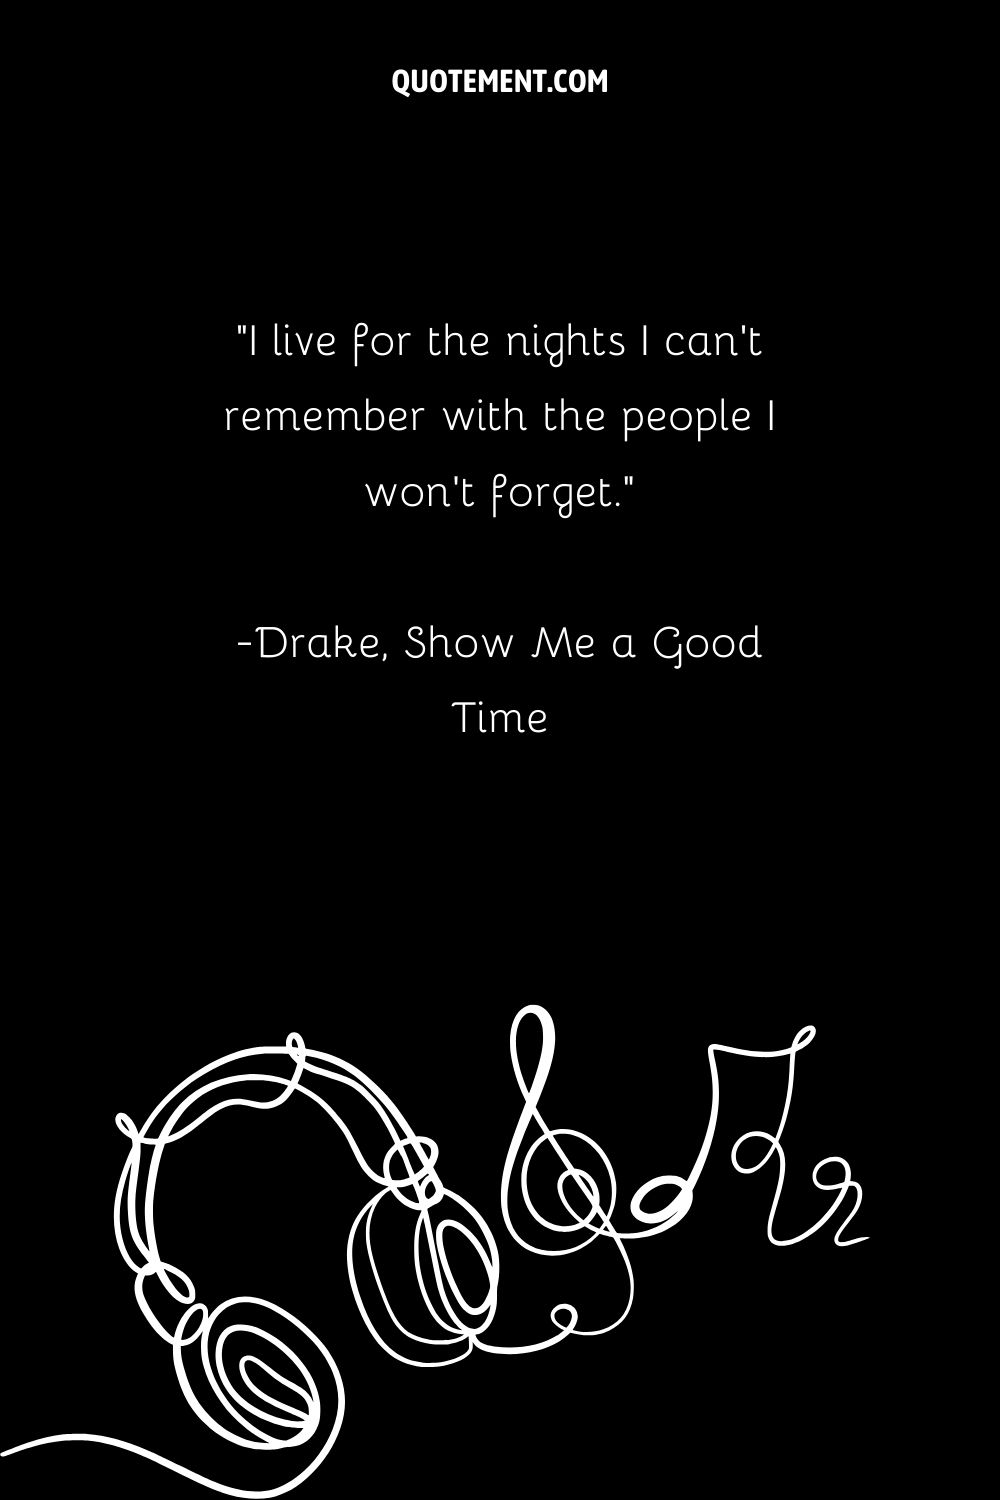 “I live for the nights I can’t remember with the people I won’t forget.” — Drake, Show Me a Good Time